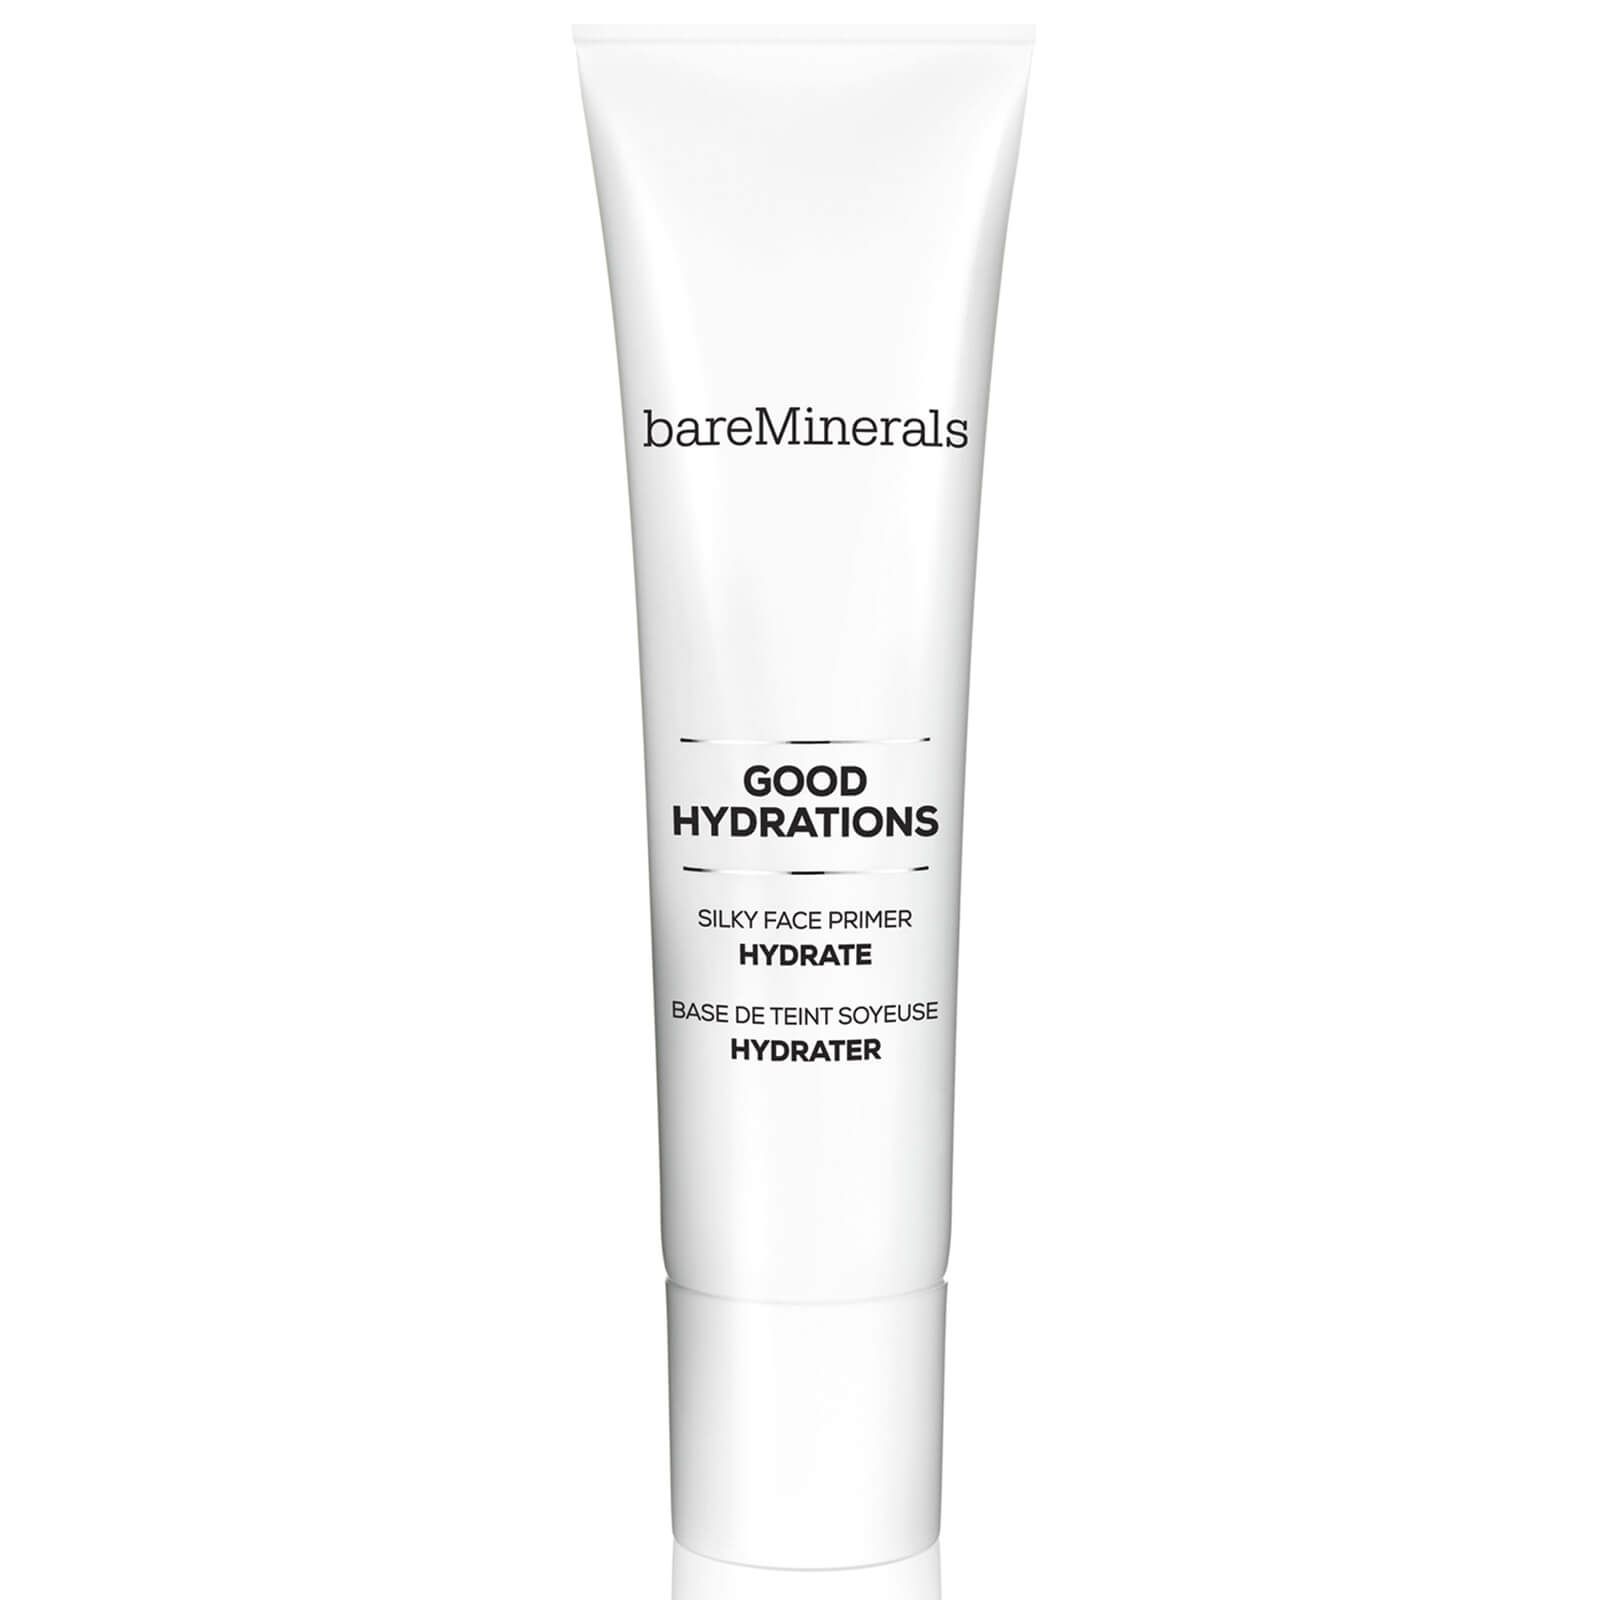 bareMinerals Good Hydrations Silky Face Primer - Hydrate 30ml | Look Fantastic (UK)